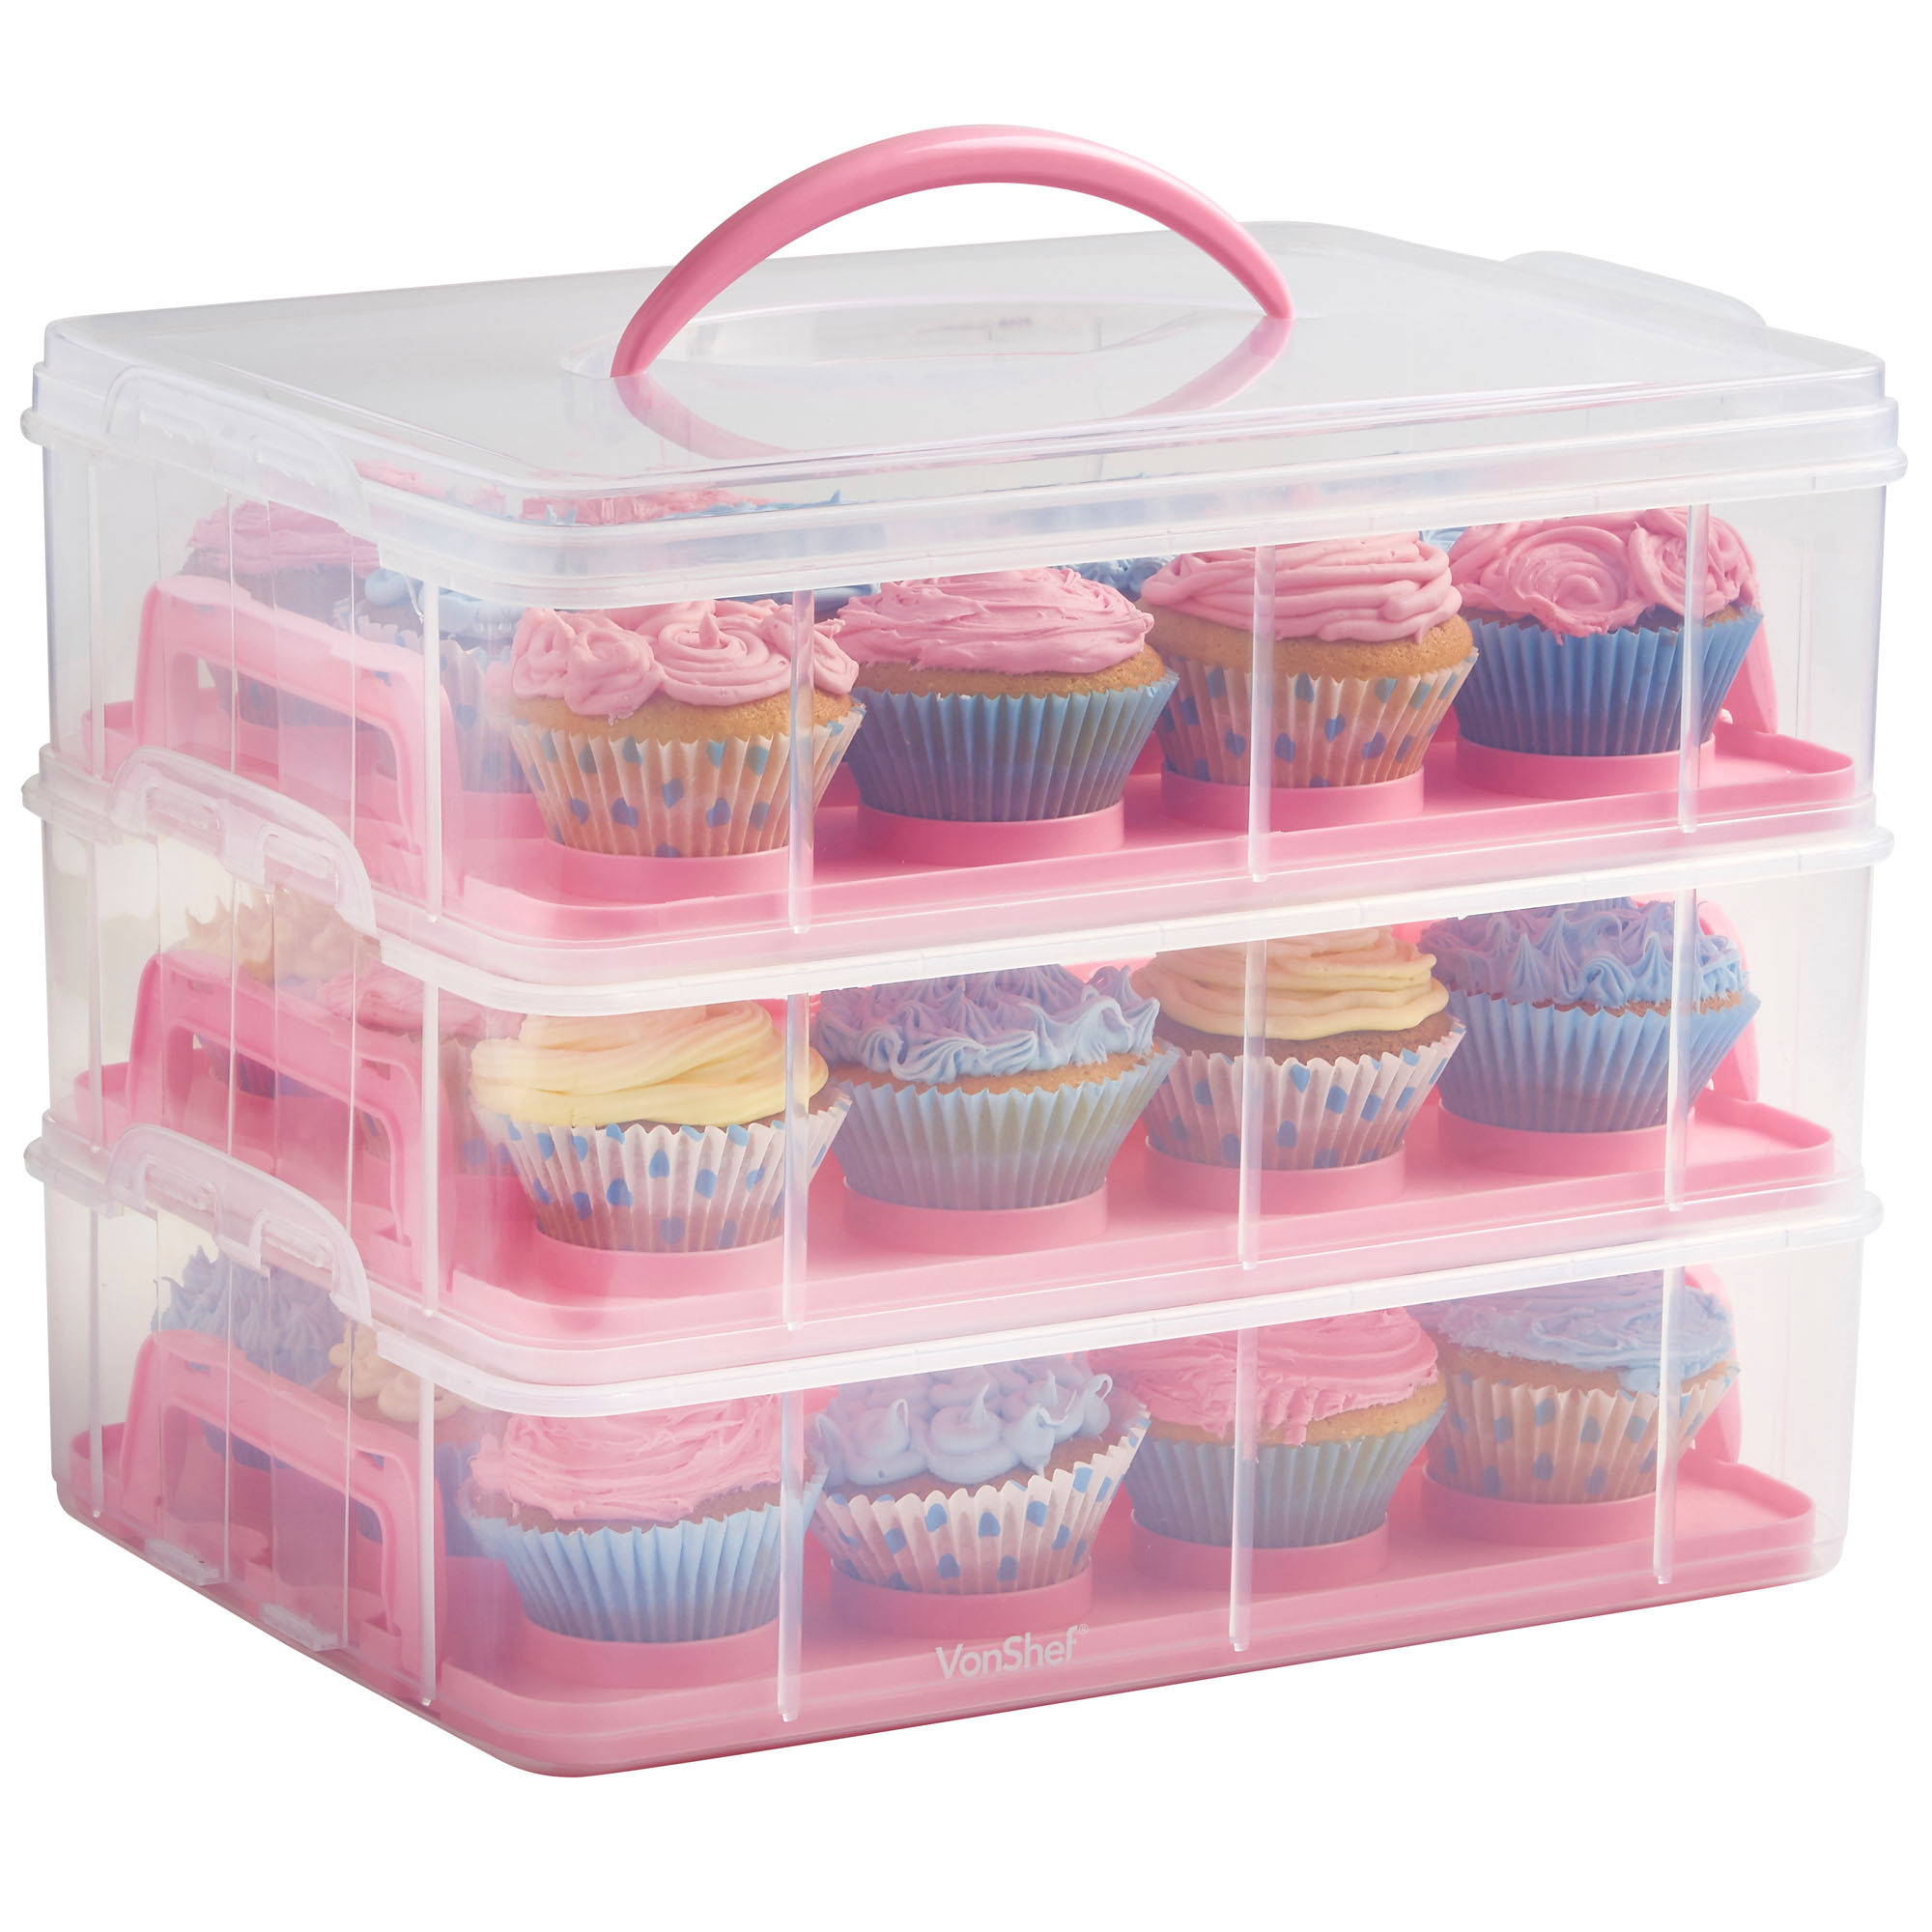 VonShef 3 Tier Pink Cupcake Holder and Cake Storage Carrier Box Container